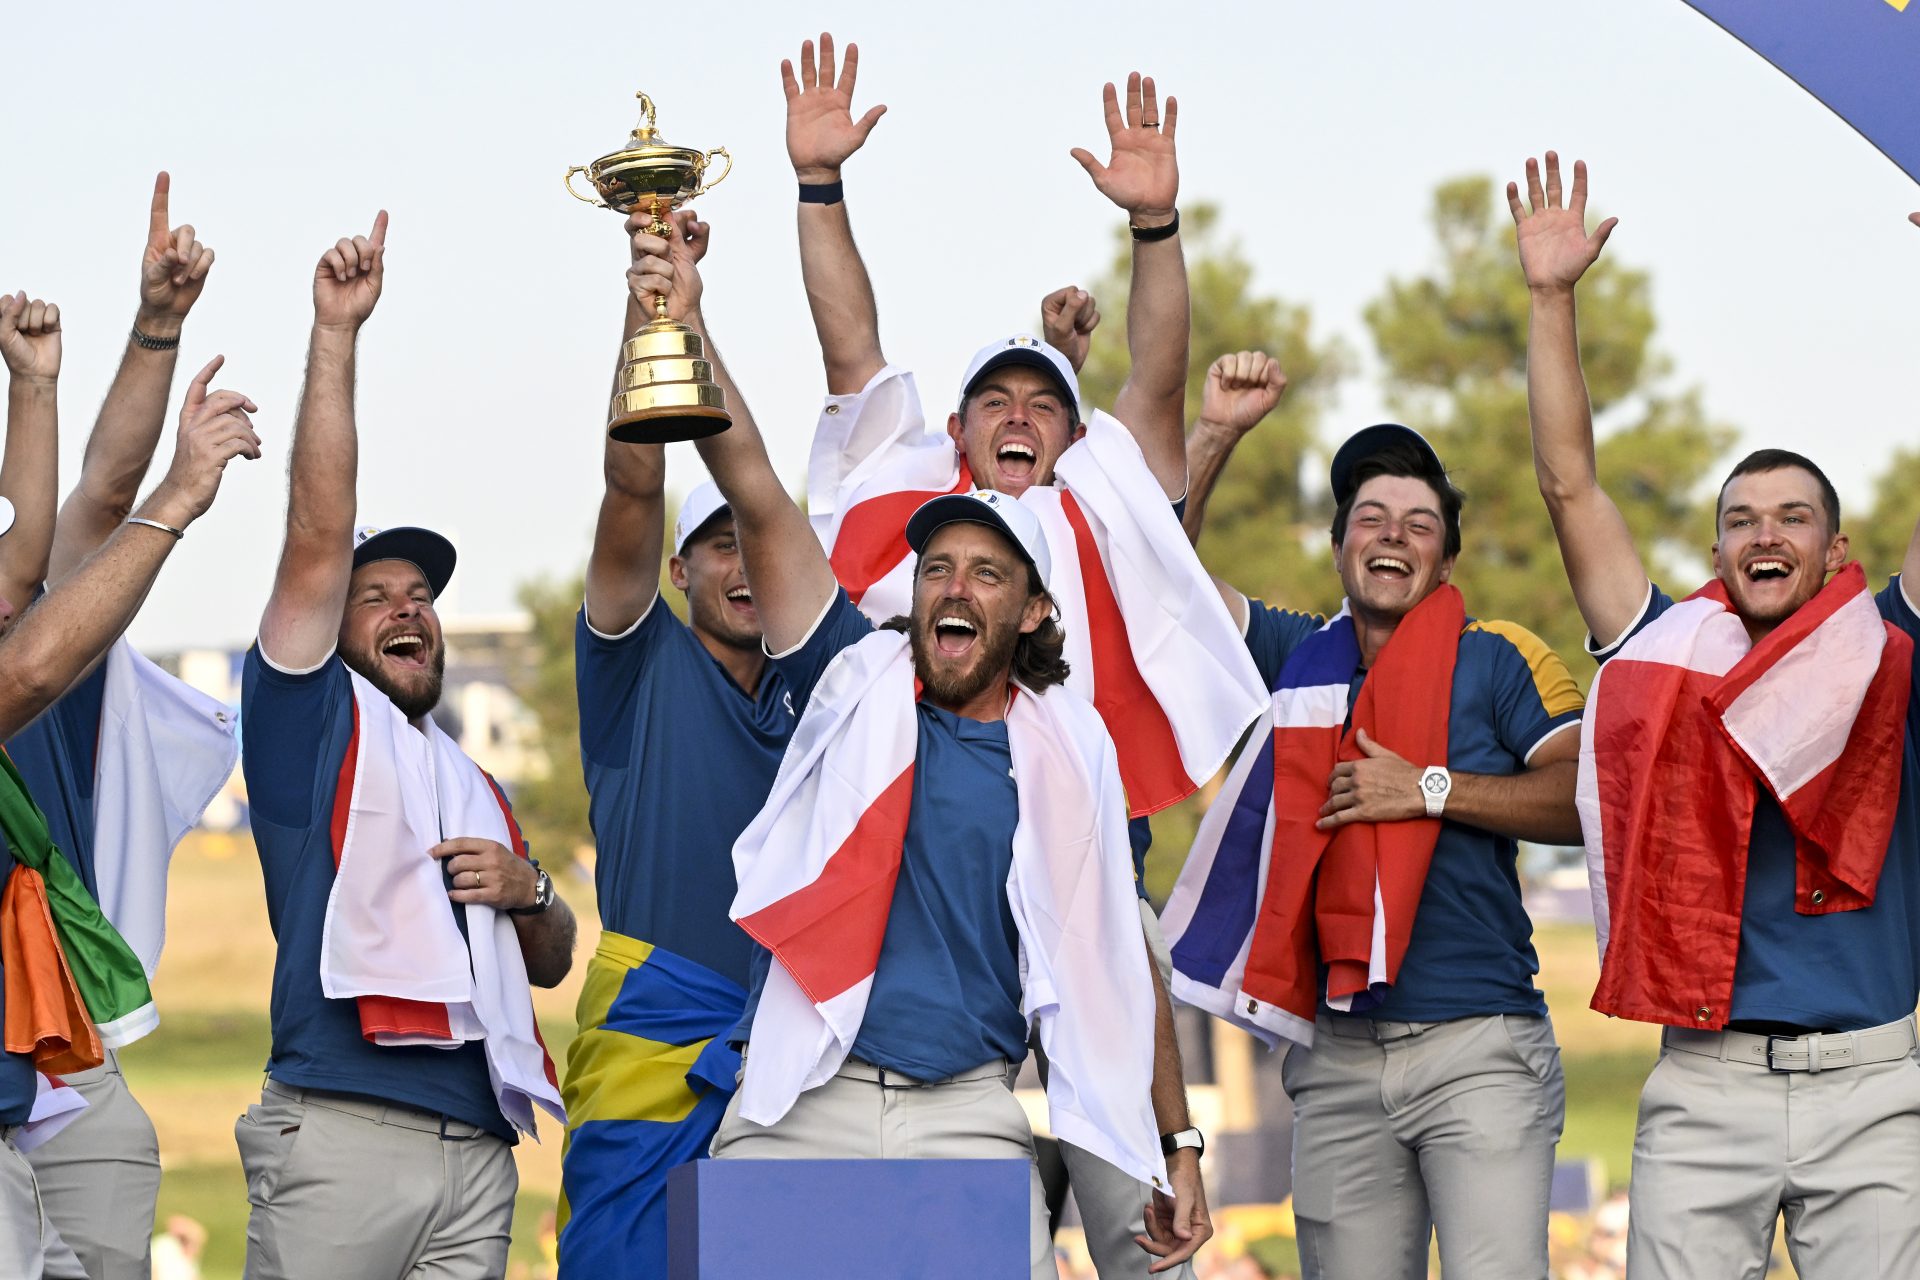 What went wrong for Team USA at the Ryder Cup?